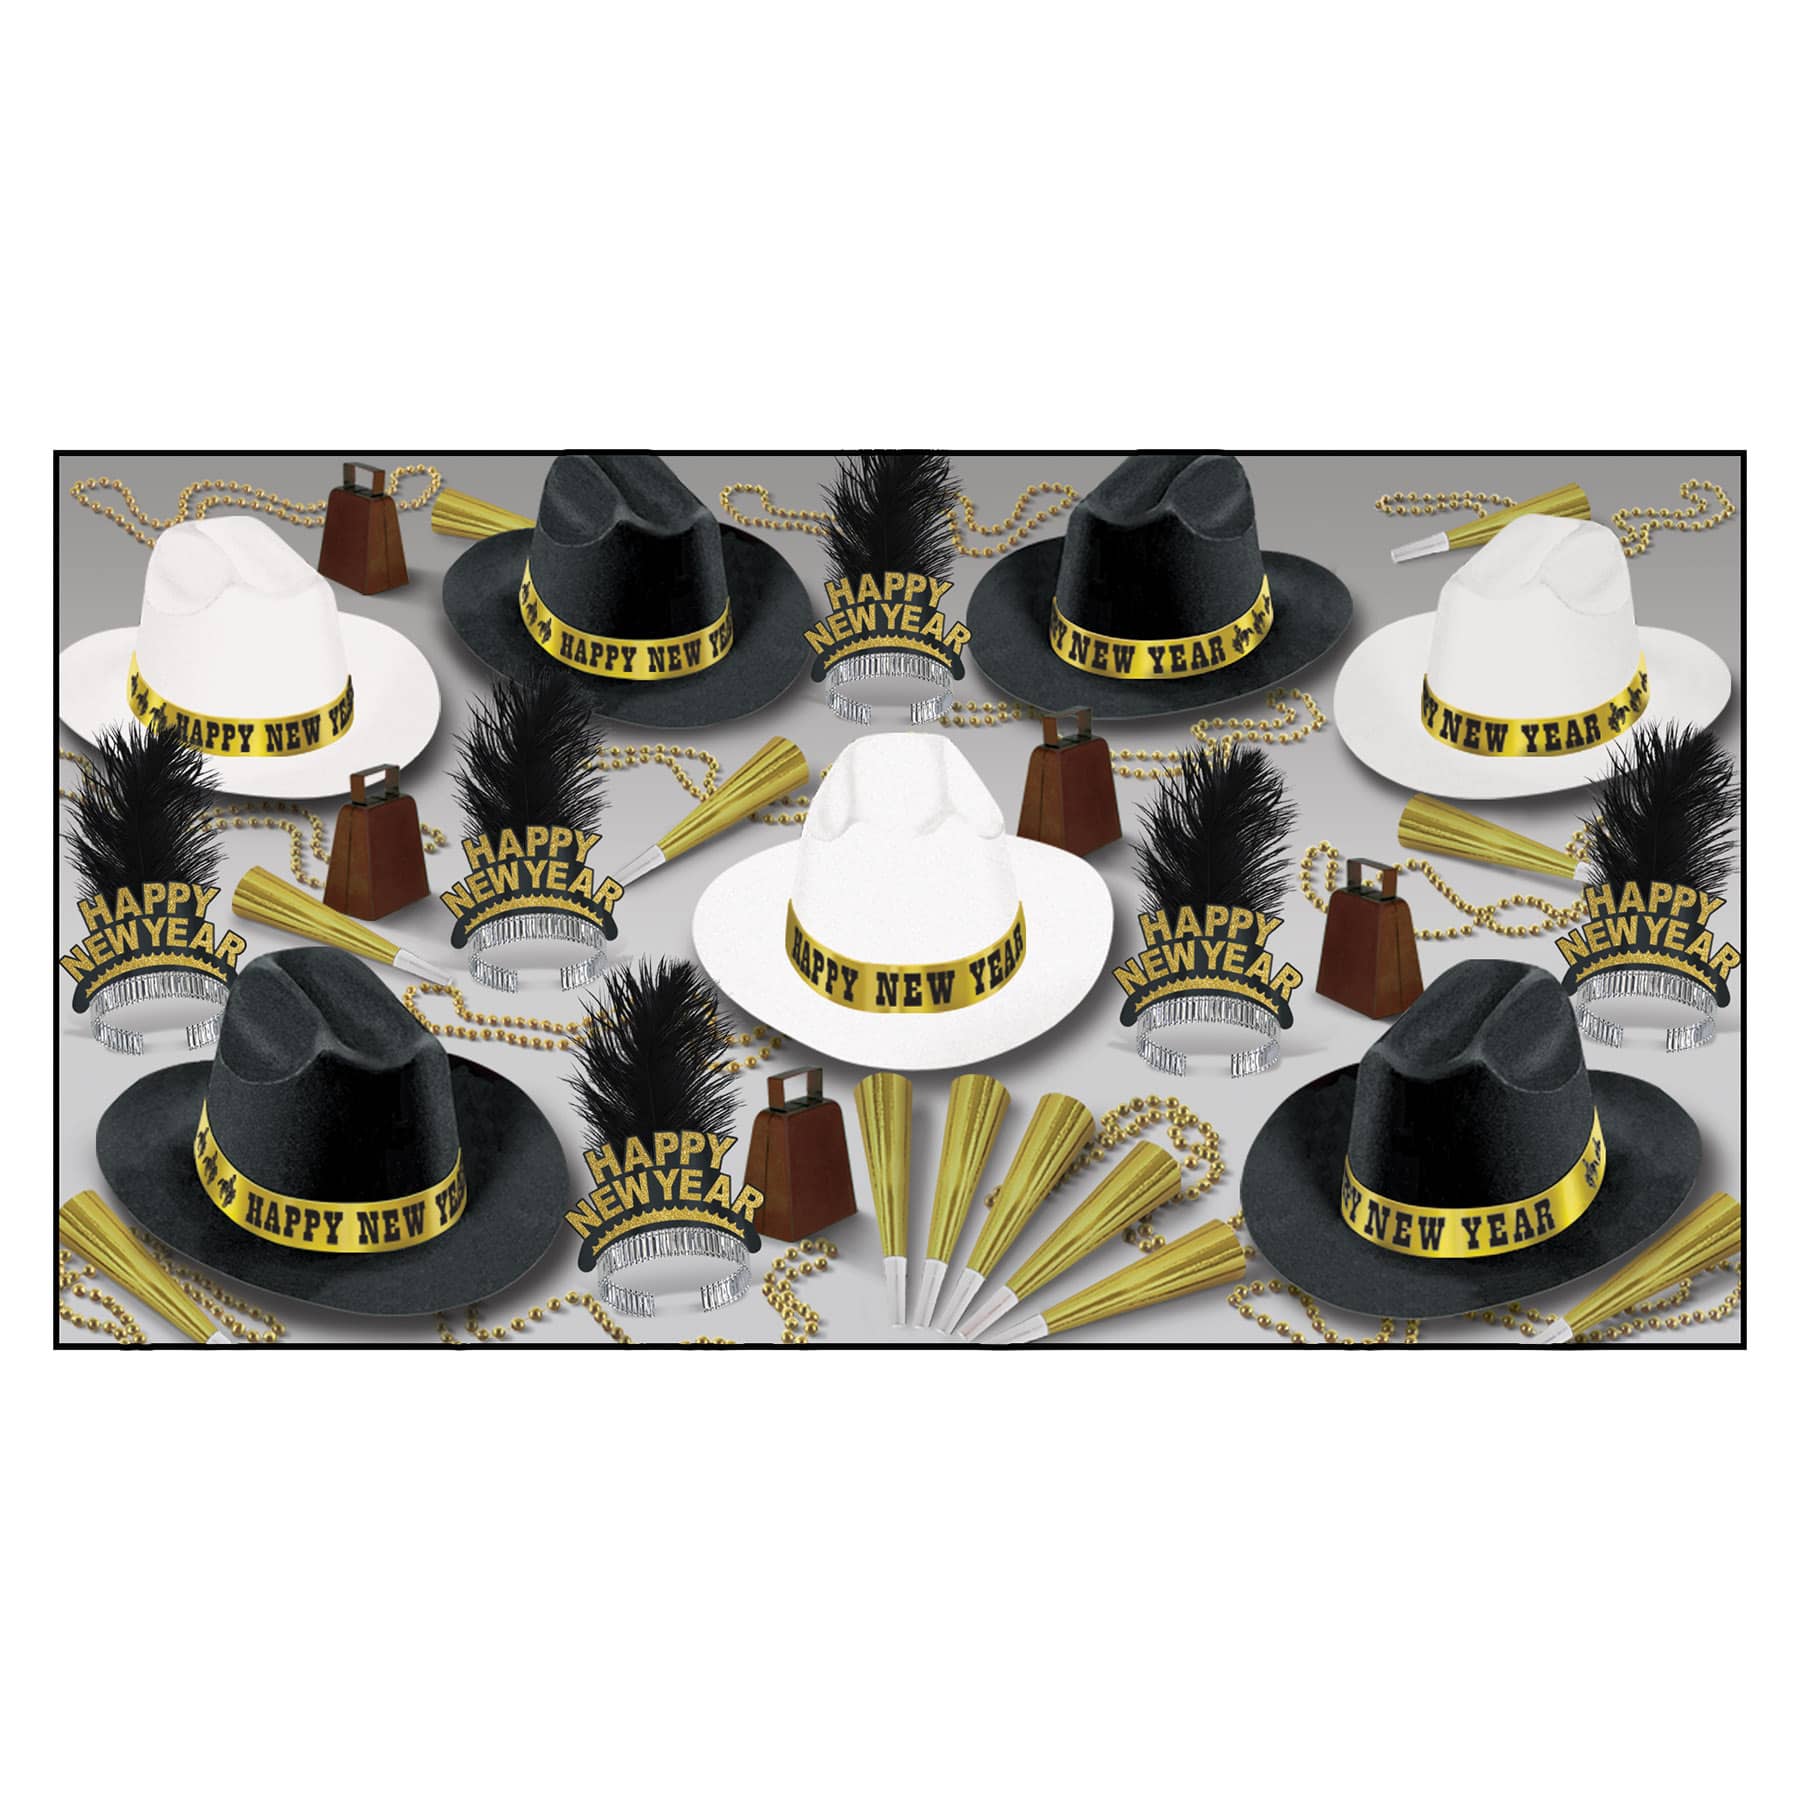 Western themed new years eve party kits with black and white cowboy hats